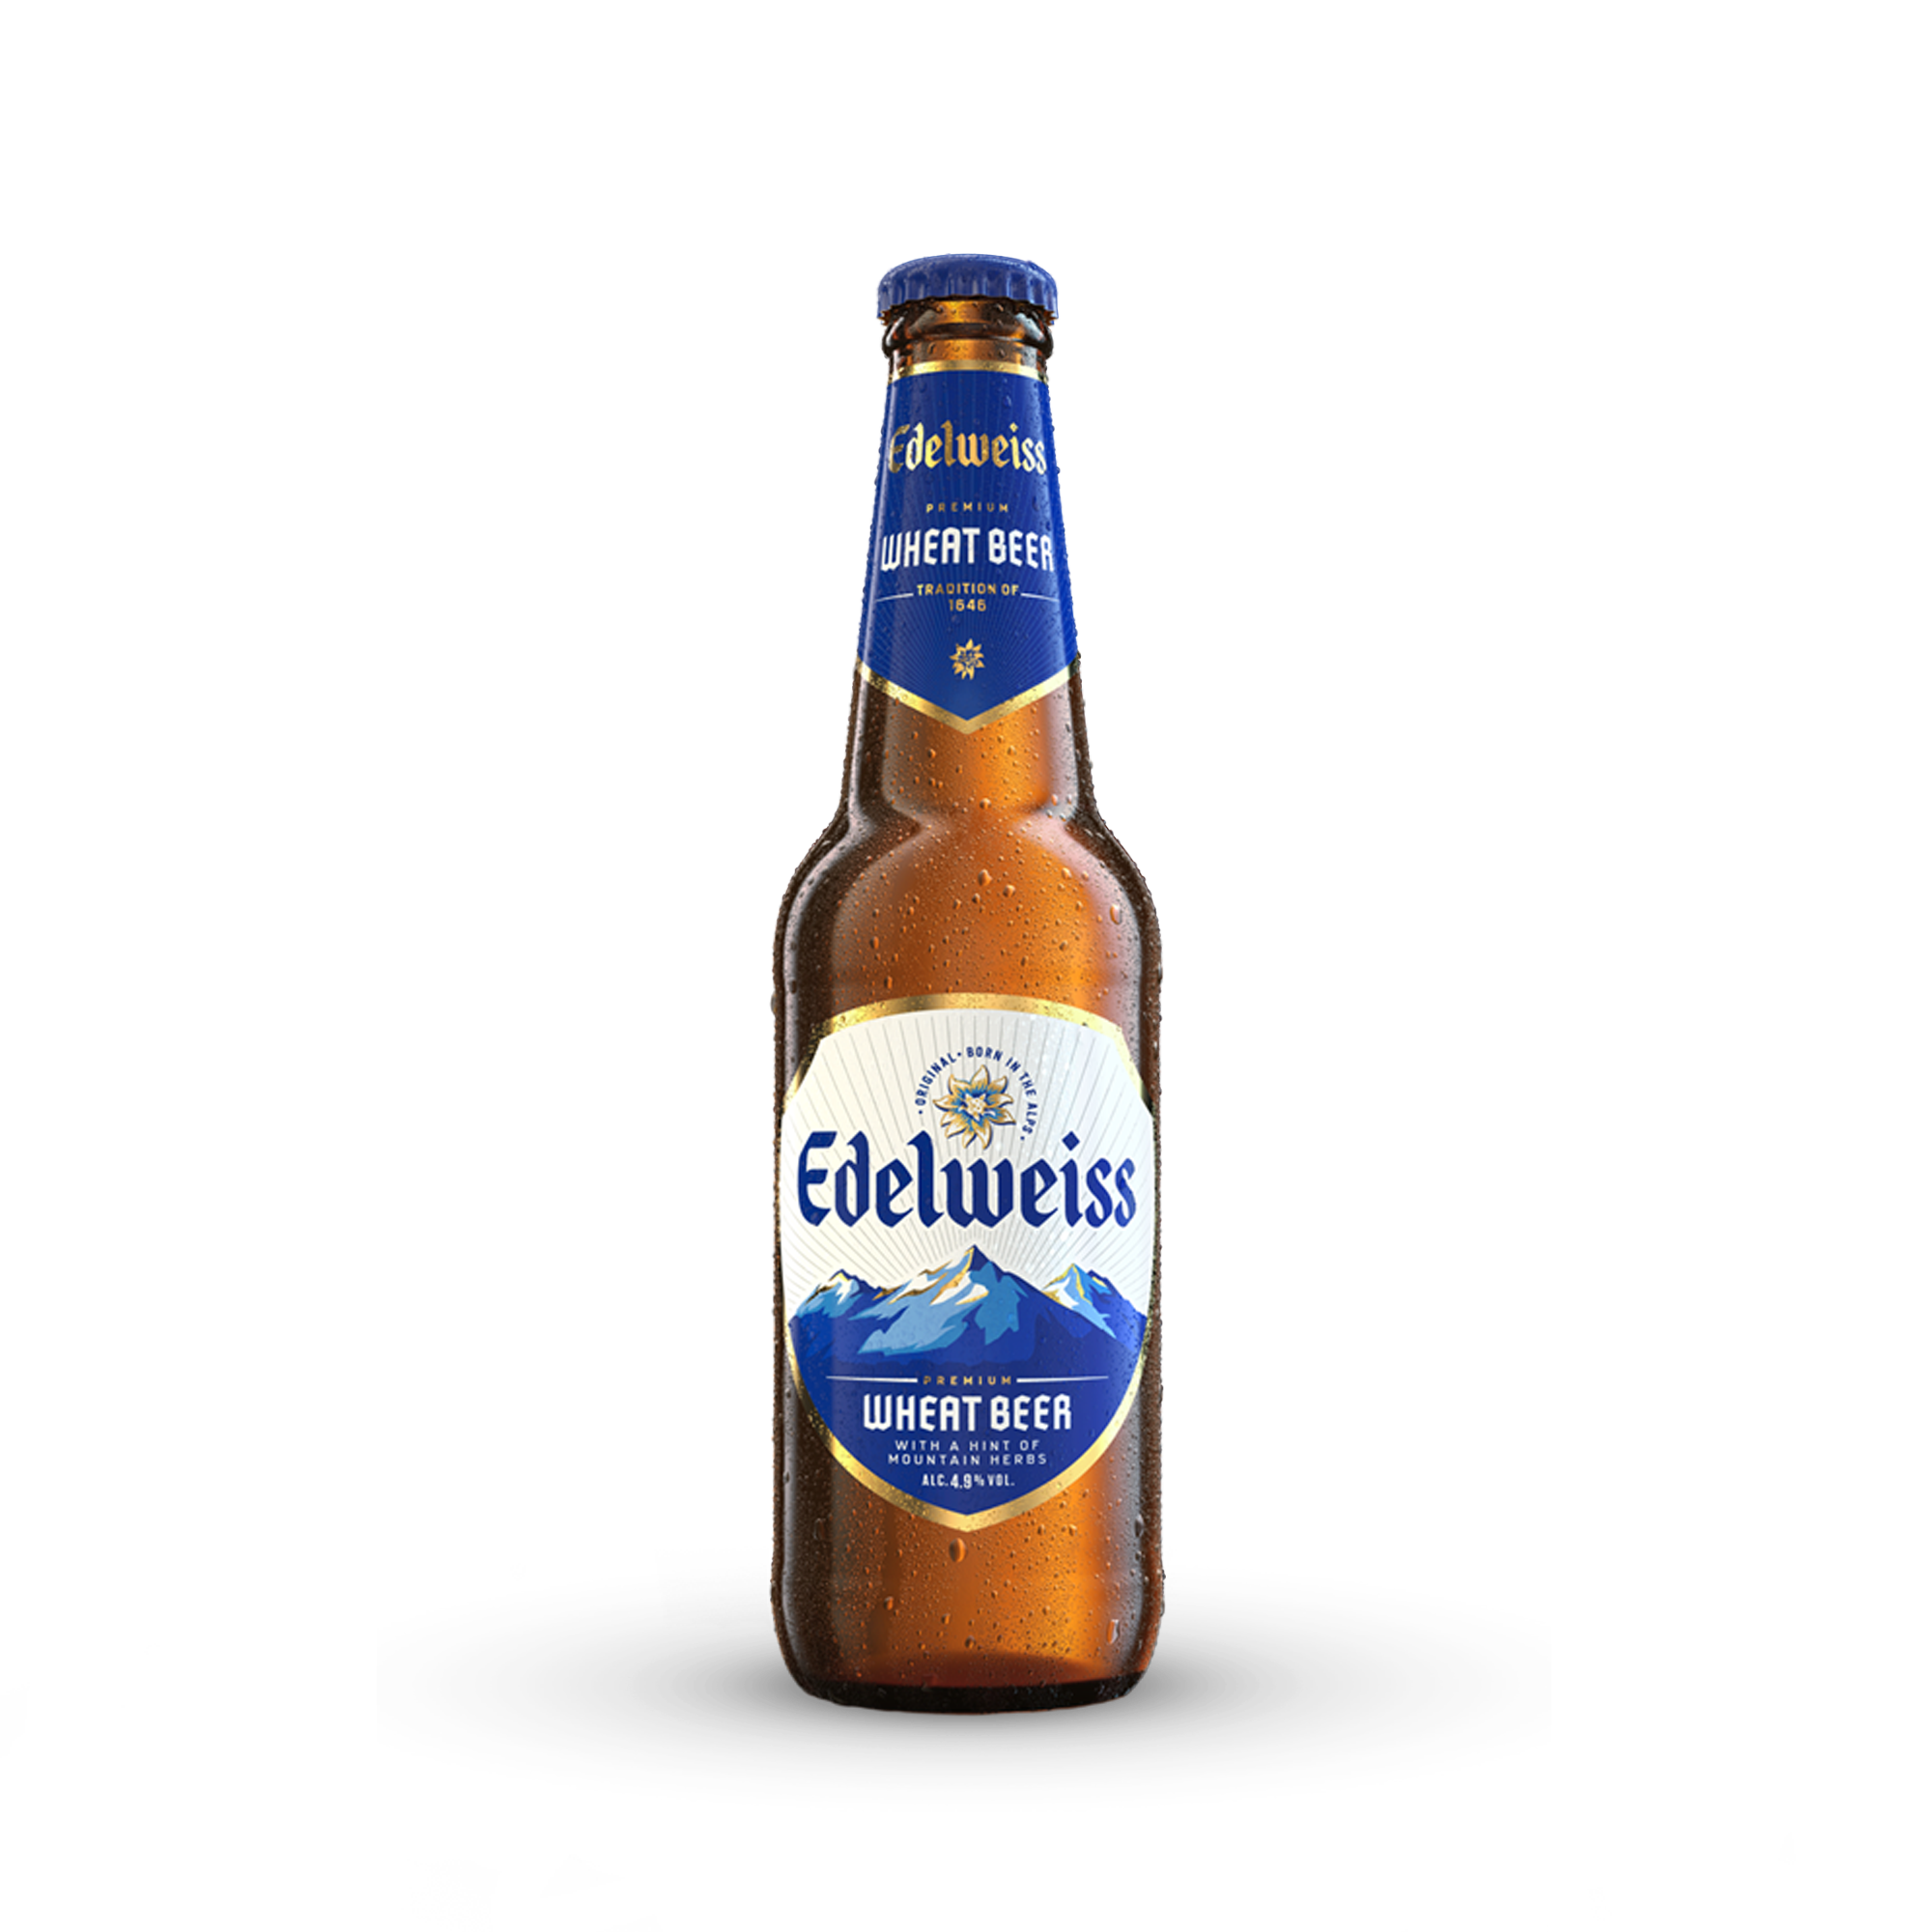 Edelweiss Wheat Beer Bottle Image (With Shade)